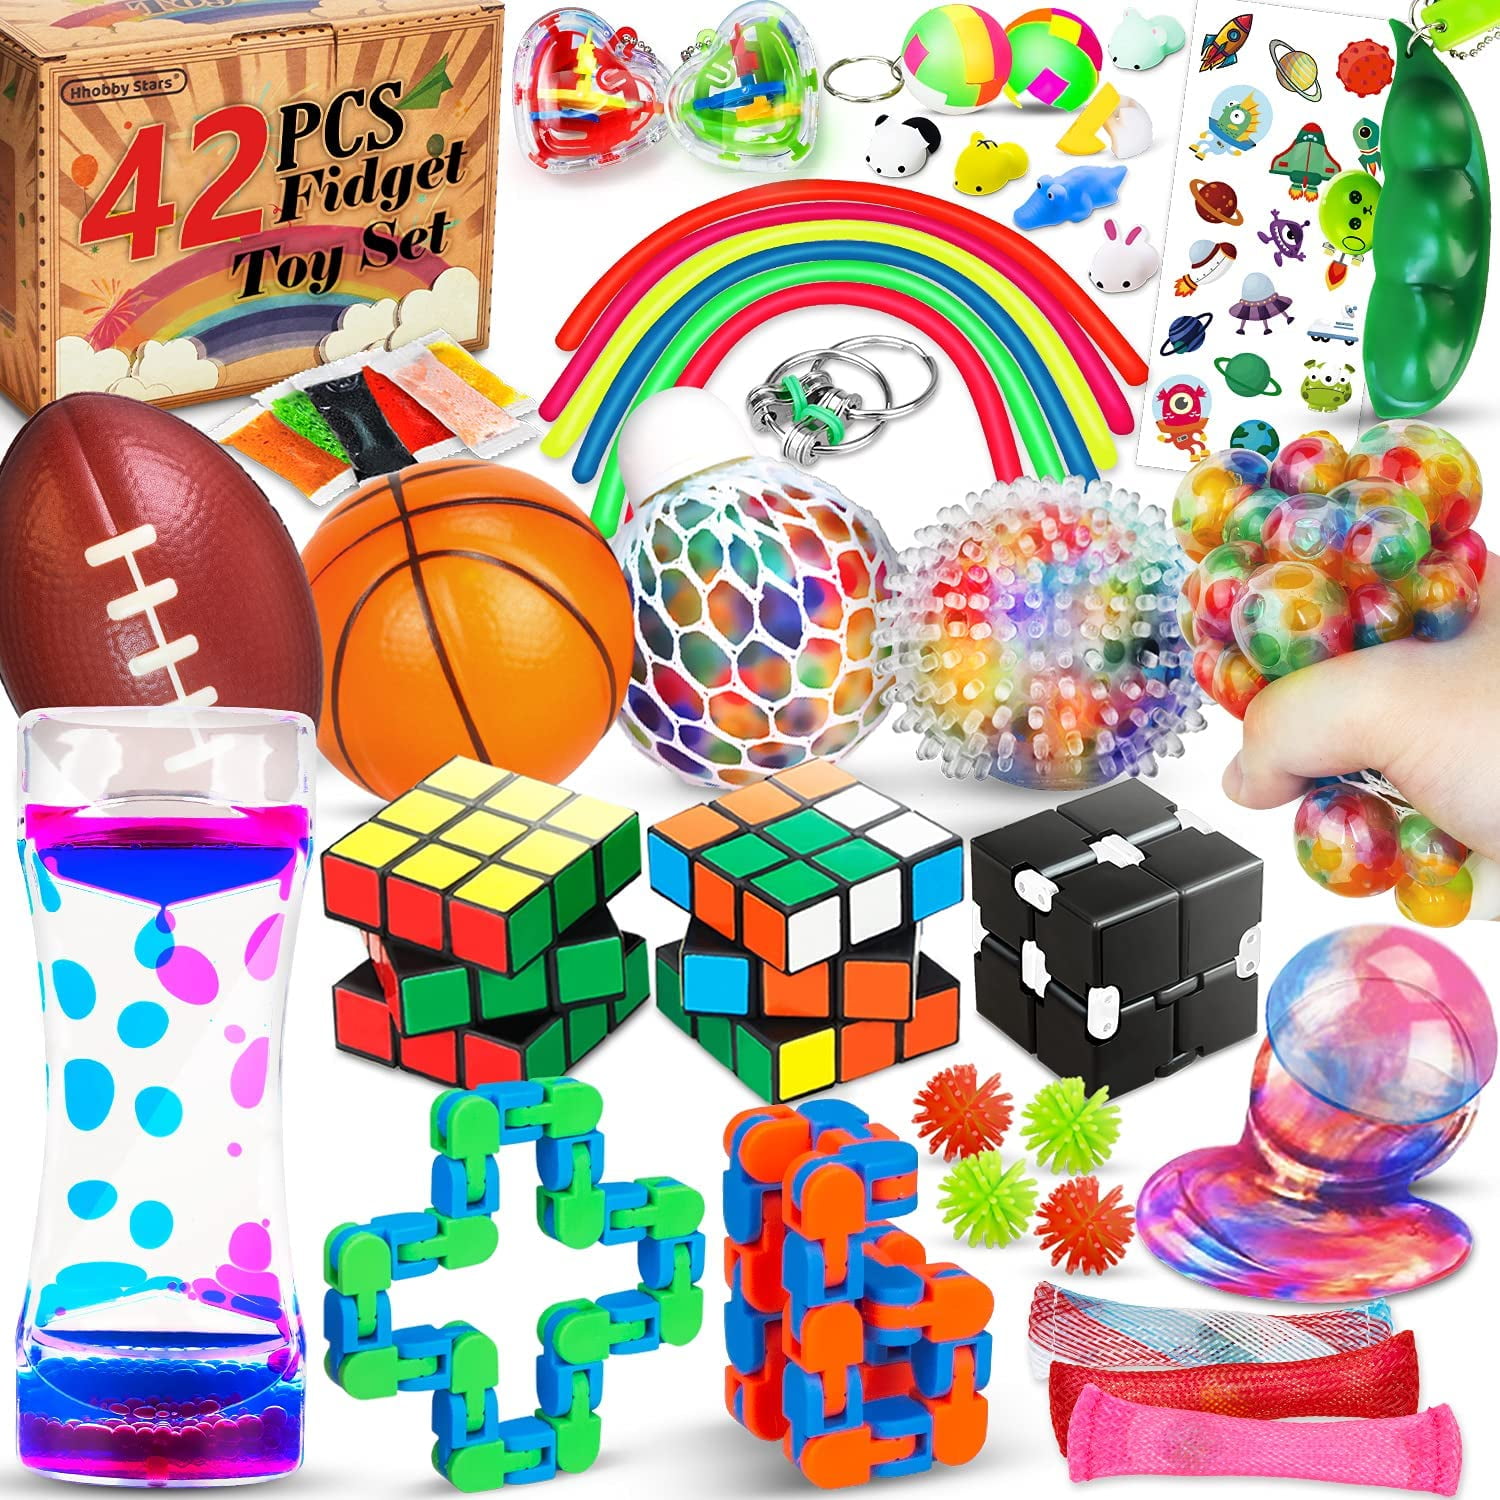 Assorted pack of 10 stress balls ADHD Autism fiddle fidget toys reliever 